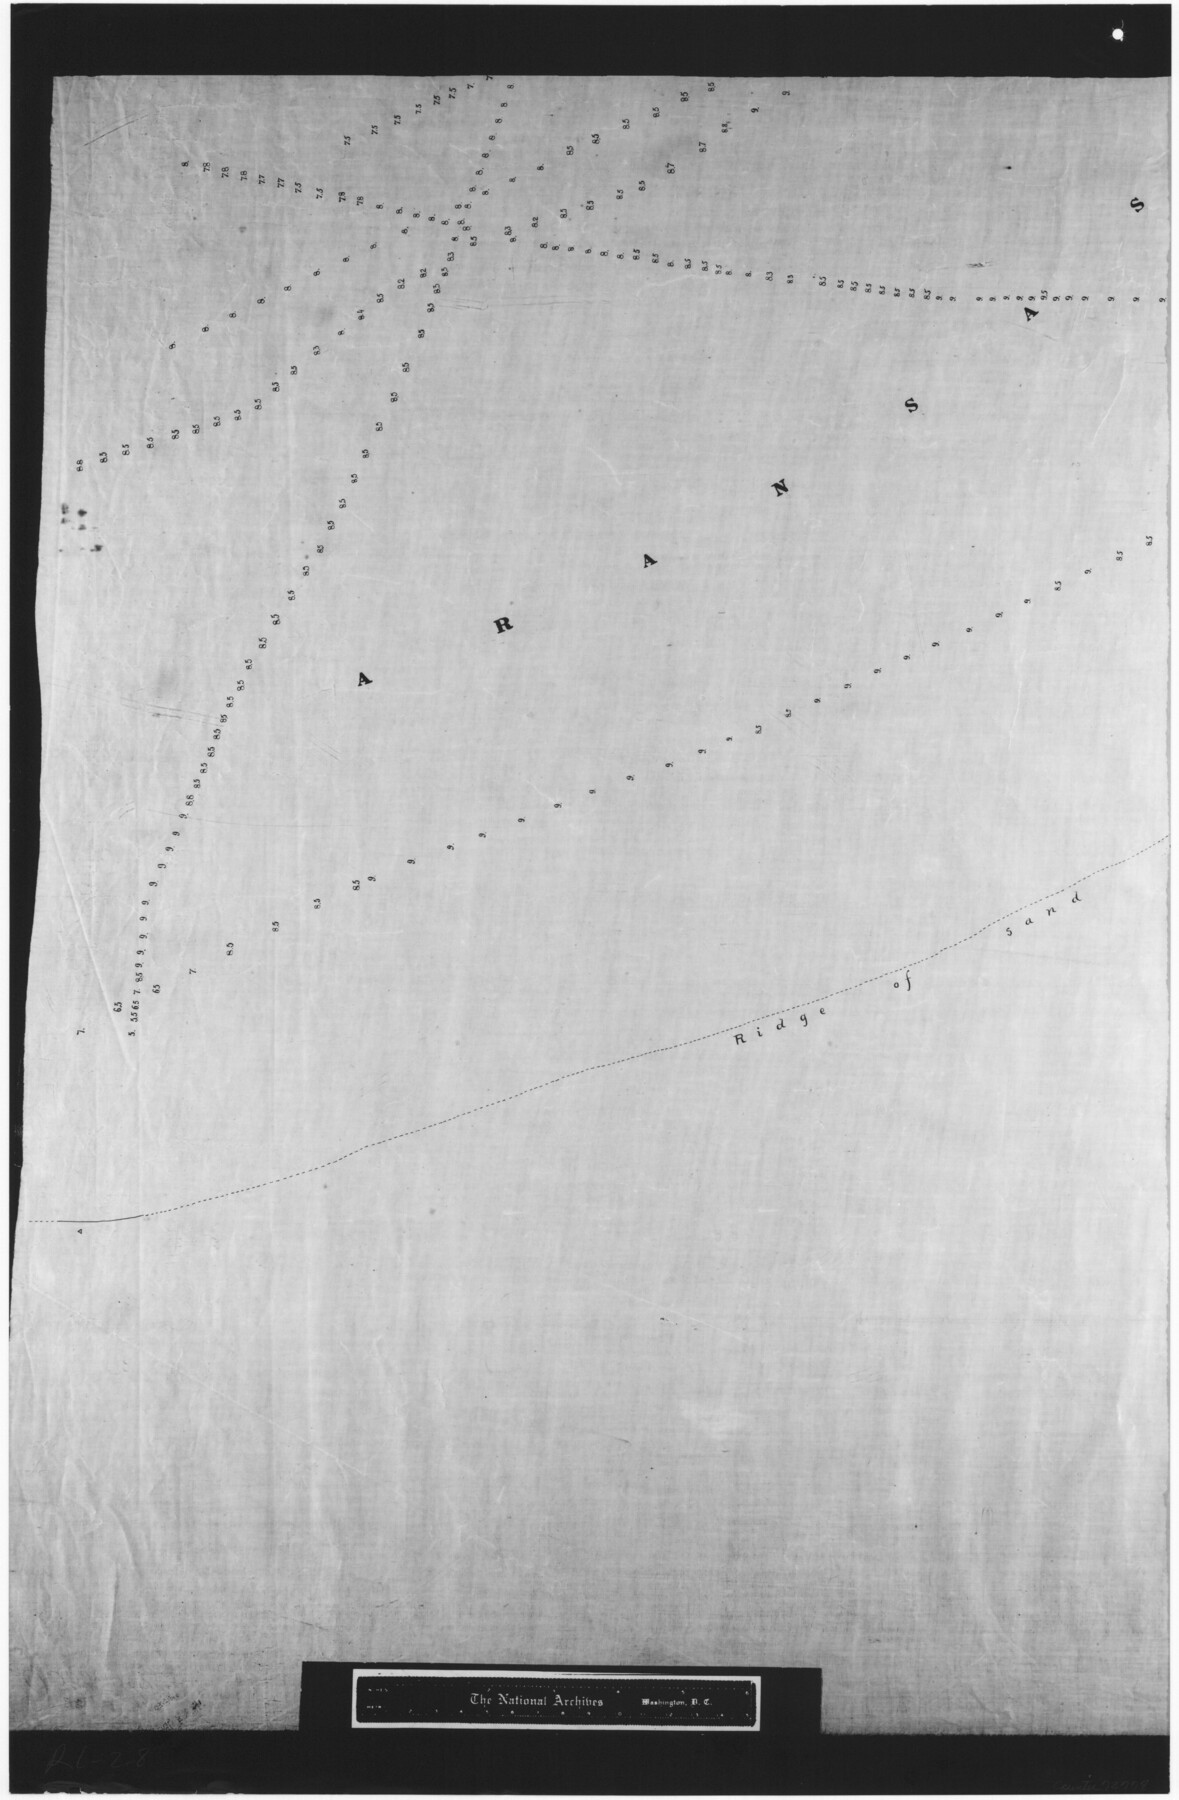 72778, No. 3 Chart of Channel connecting Corpus Christi Bay with Aransas Bay, Texas, General Map Collection